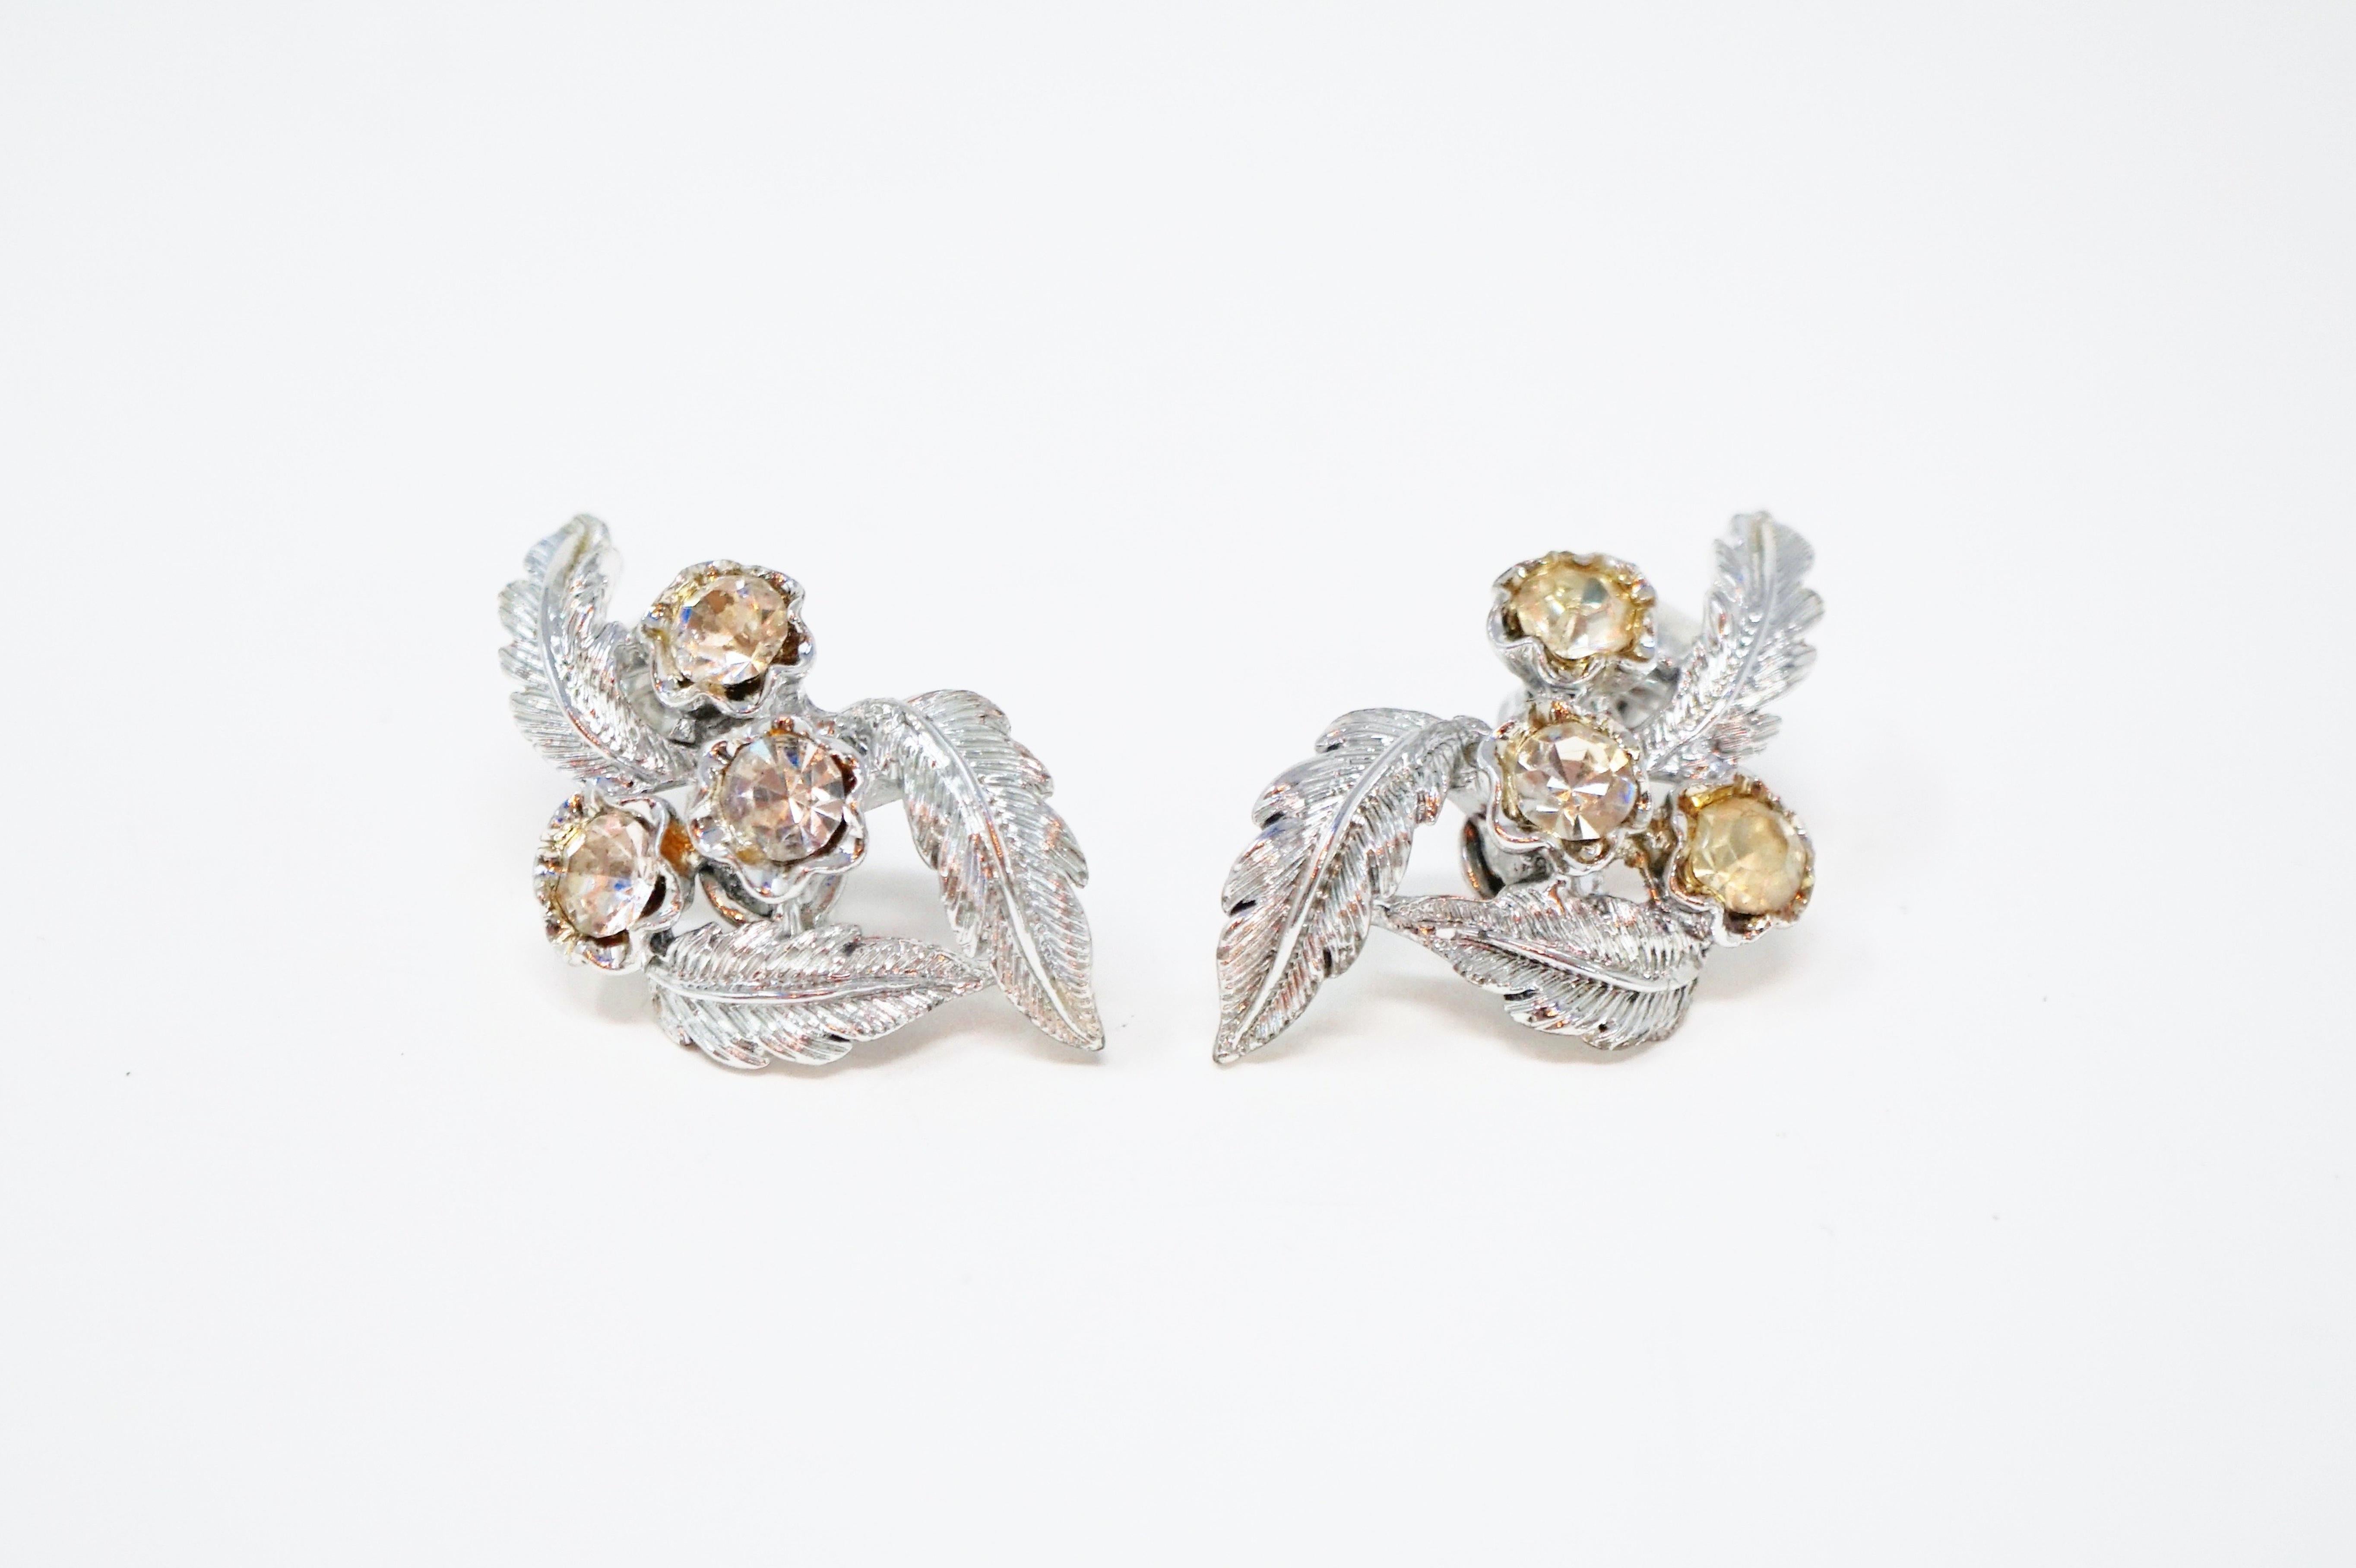 These gorgeous silver tone rhinestone leaf motif clip-on earrings by Coro, circa 1950s, are absolutely dreamy. Rhodium plating and high quality crystal rhinestones will make your ears sparkle and shine! A wonderful 